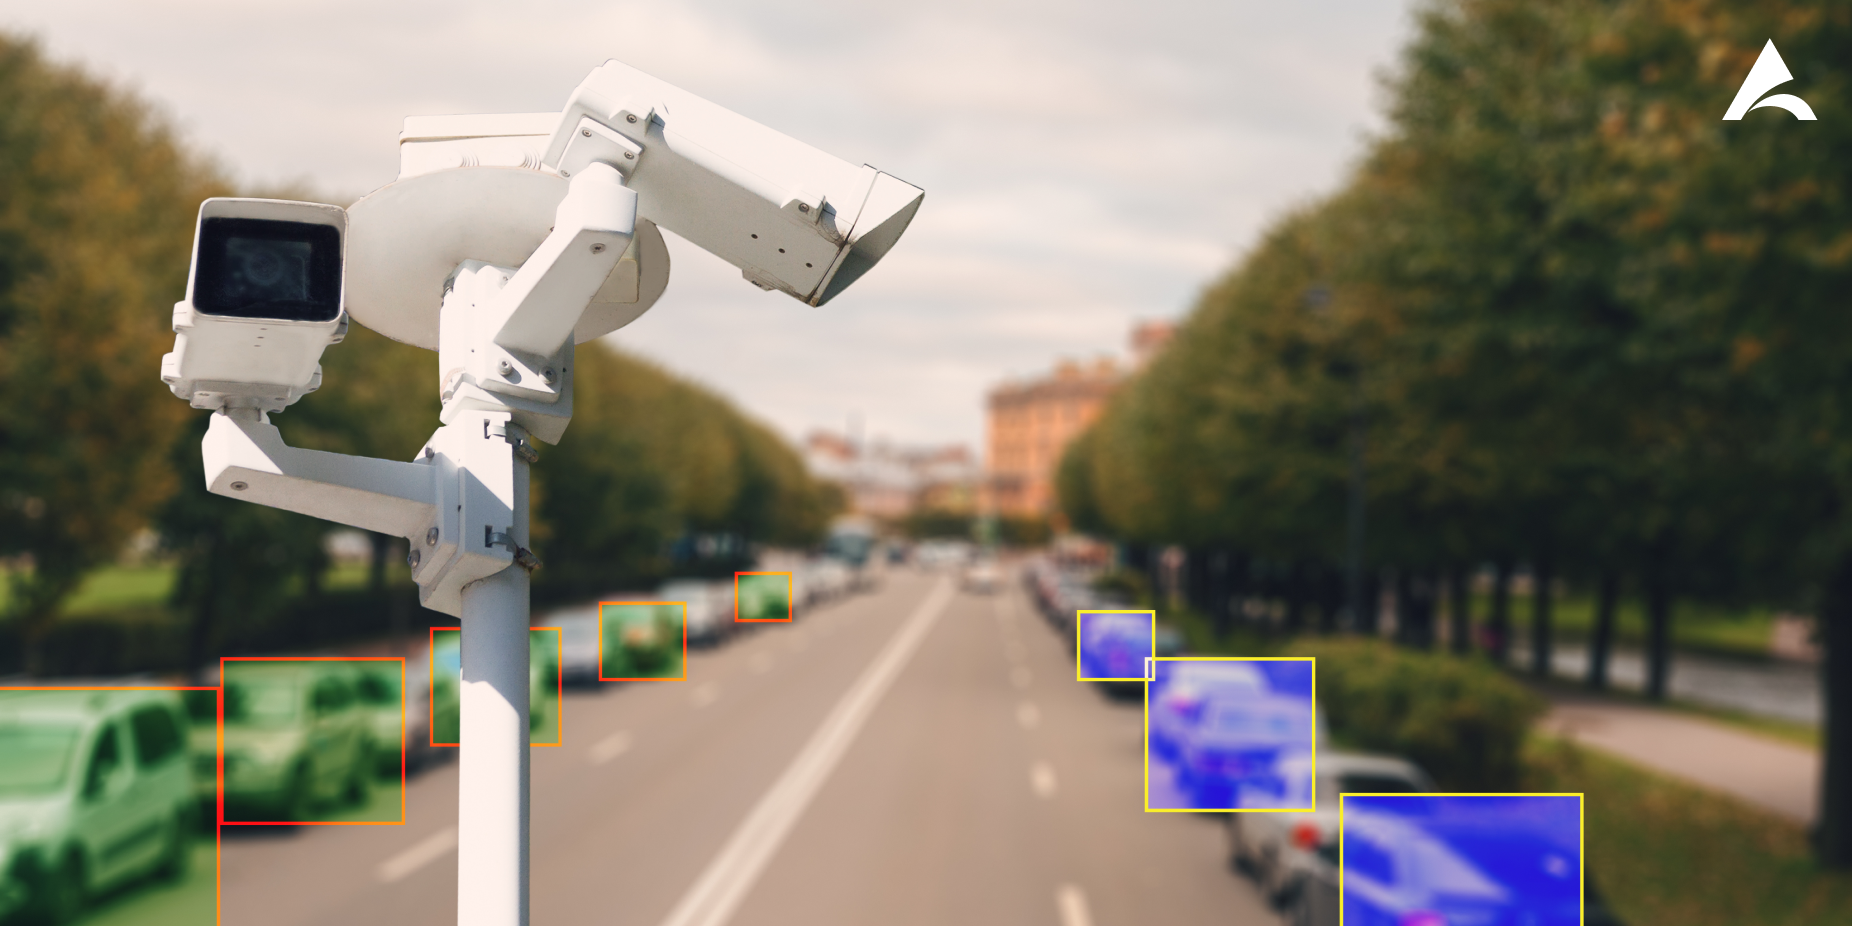 Computer vision for traffic analytics, traffic cameras detect parked cars.